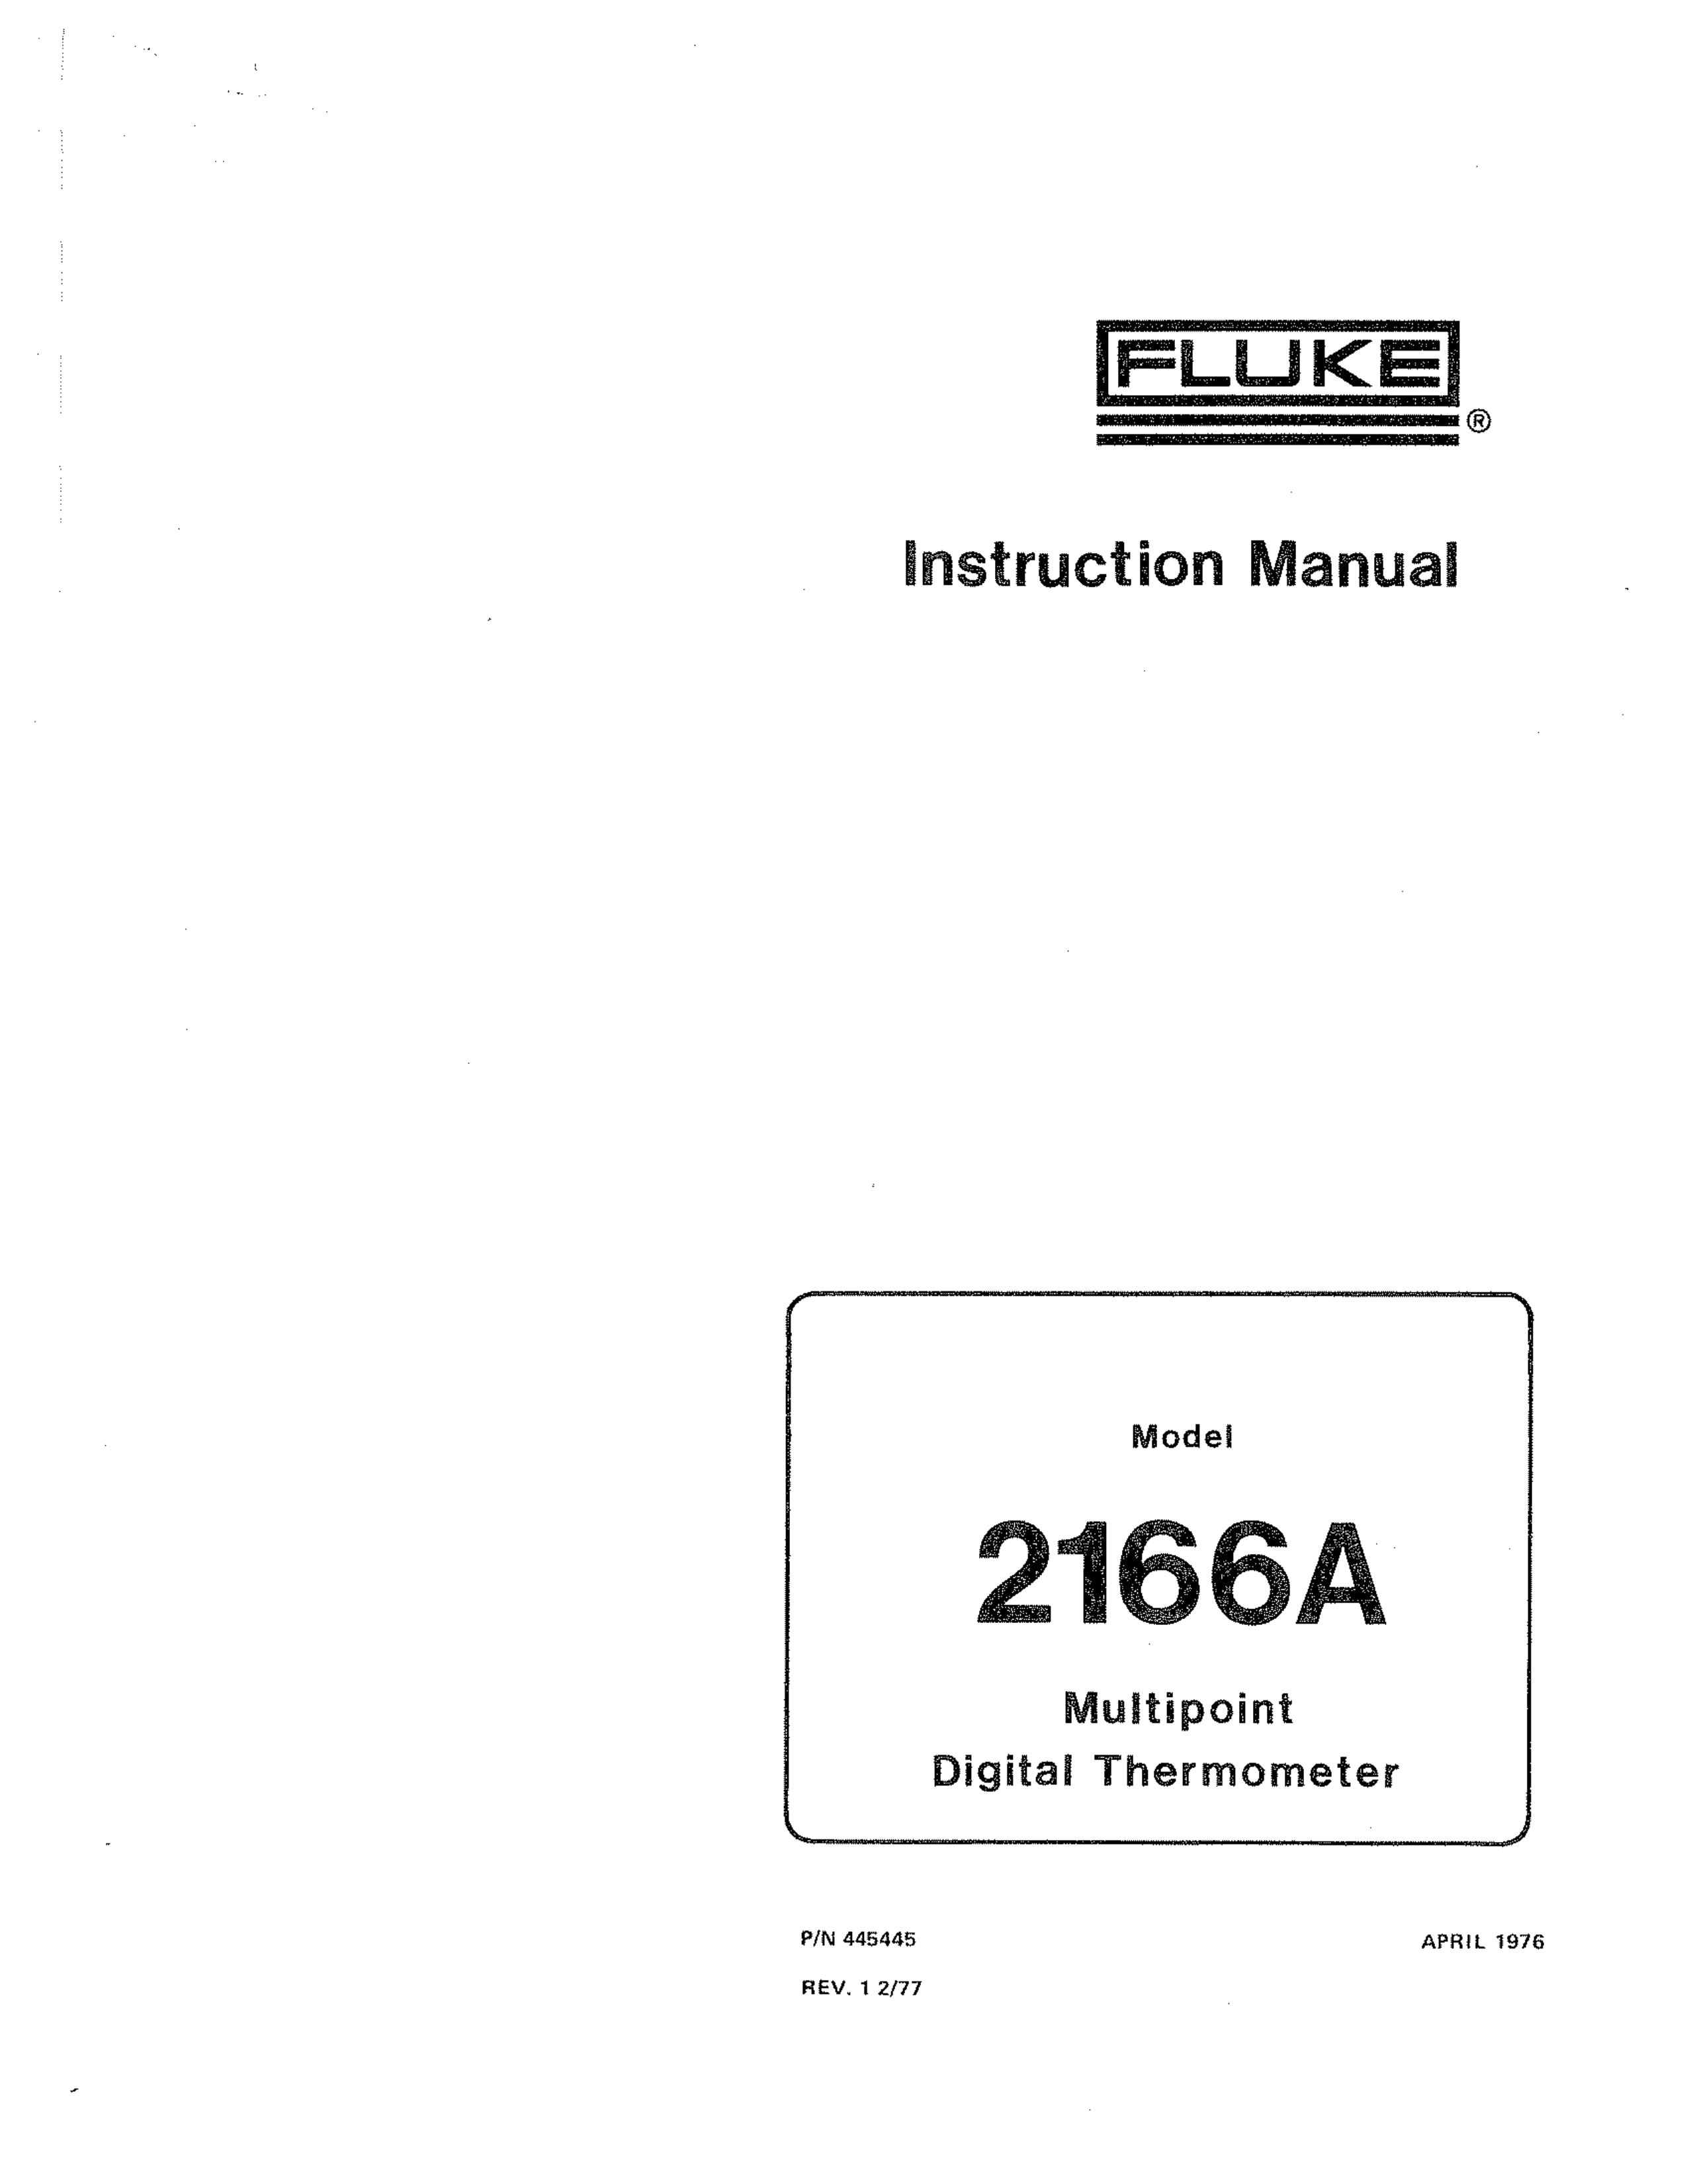 Fluke 2166A Thermometer User Manual